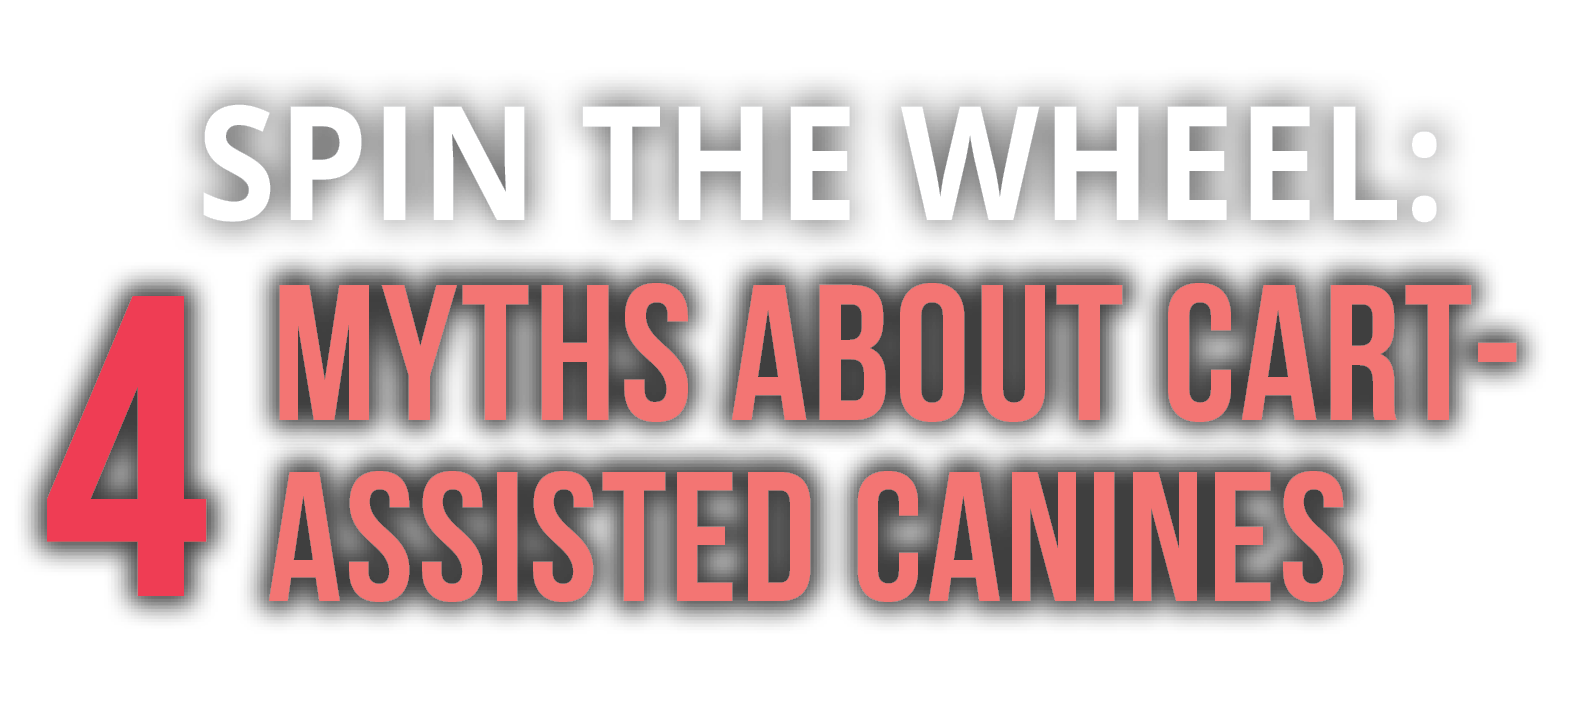 Spin the Wheel: 4 Myths About Cart-Assisted Canines